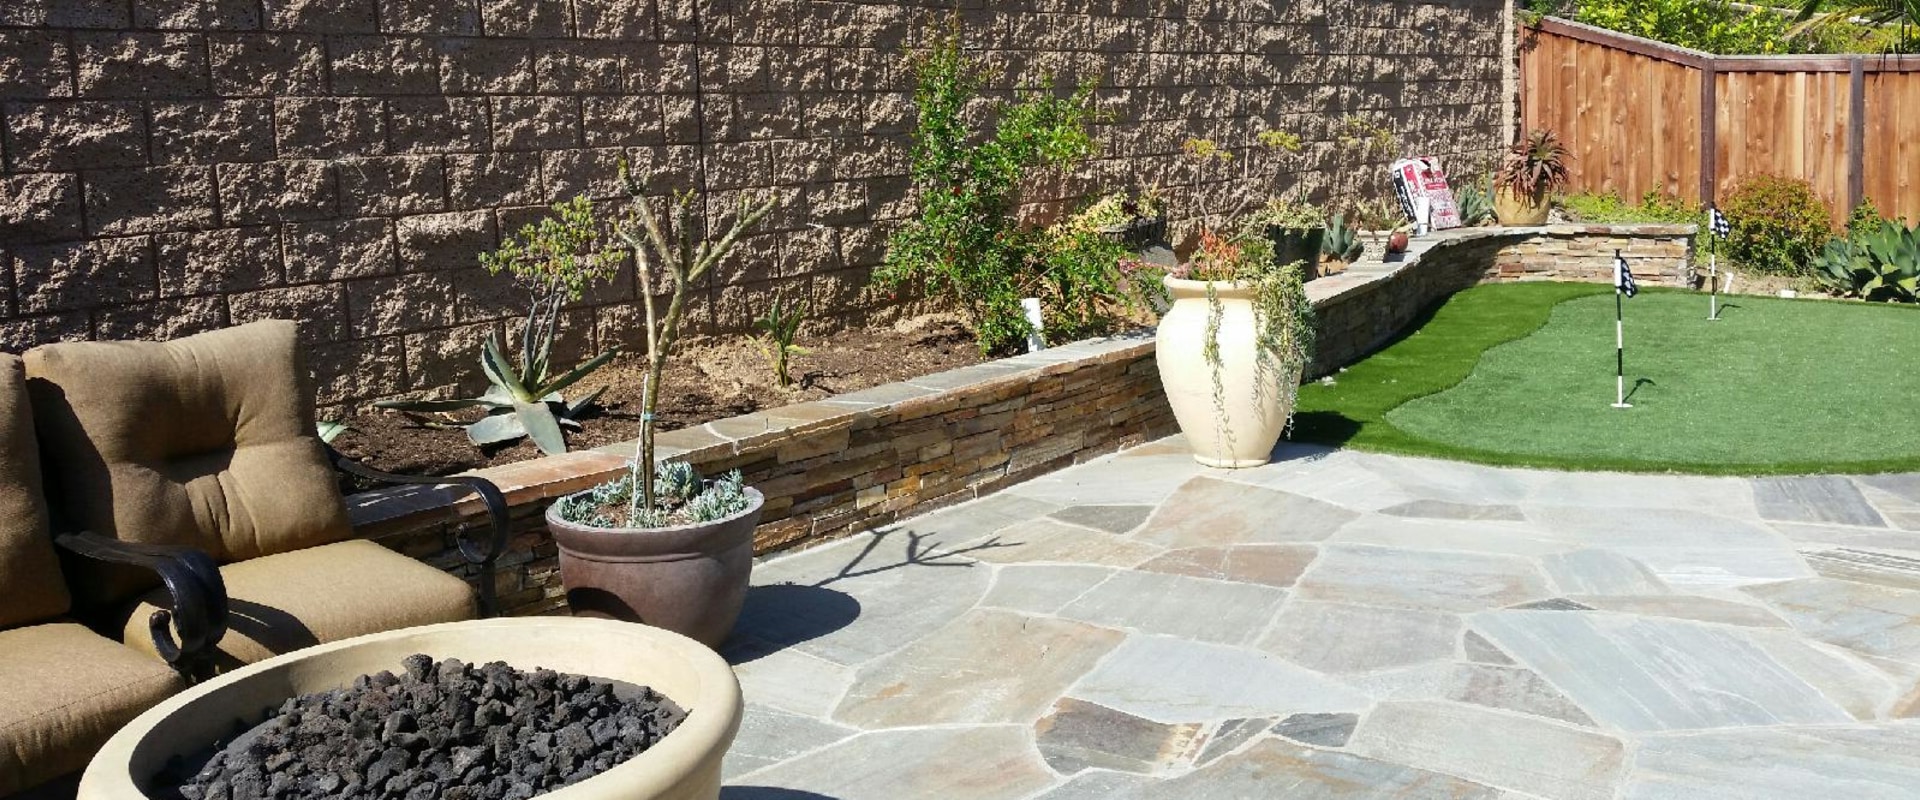 Is a patio considered hardscape?